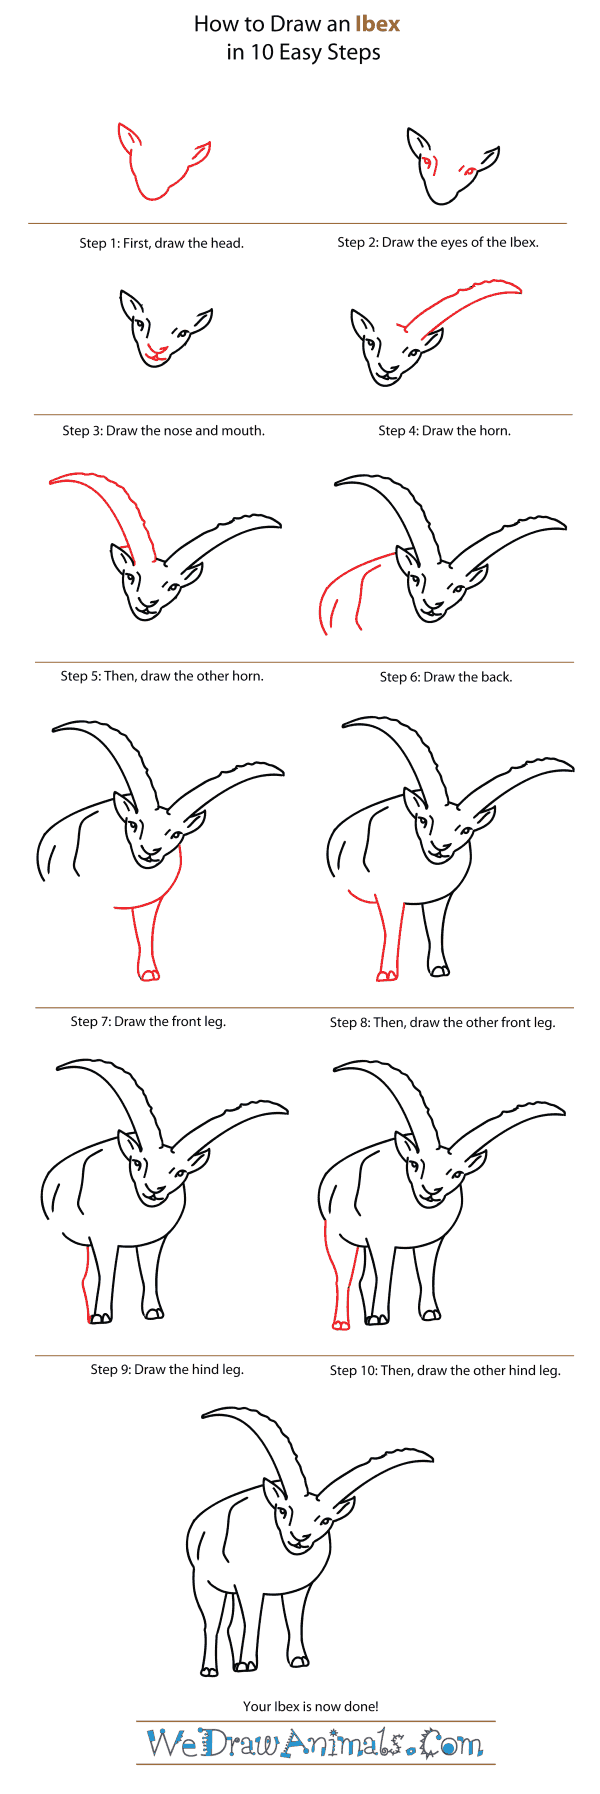 How to Draw an Ibex - Step-By-Step Tutorial